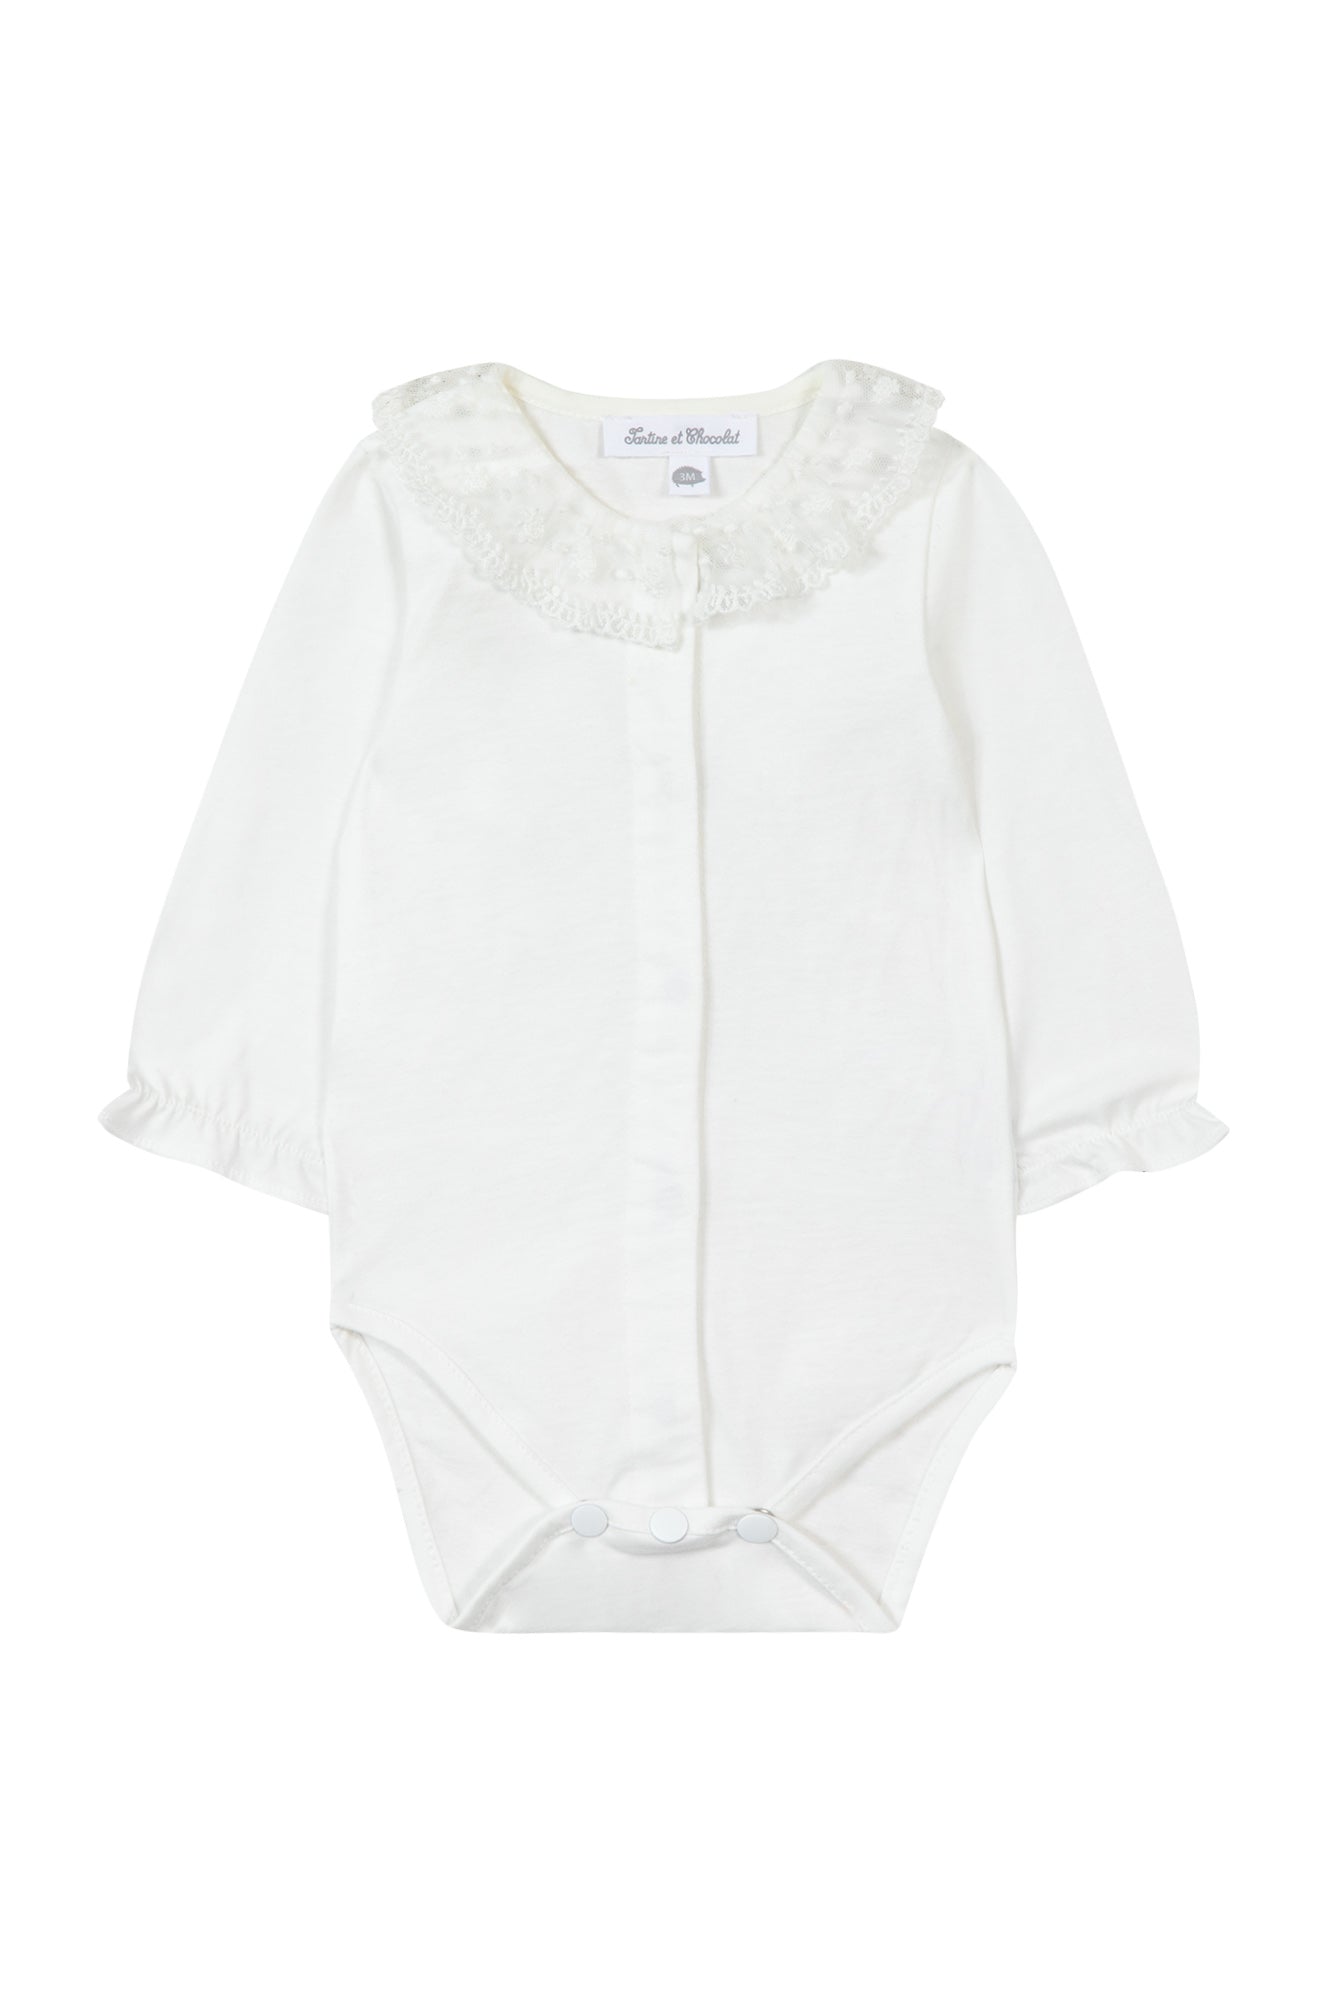 Bodysuit - Mother-of-pearl Tulle Embroidered - Tartine et Chocolat